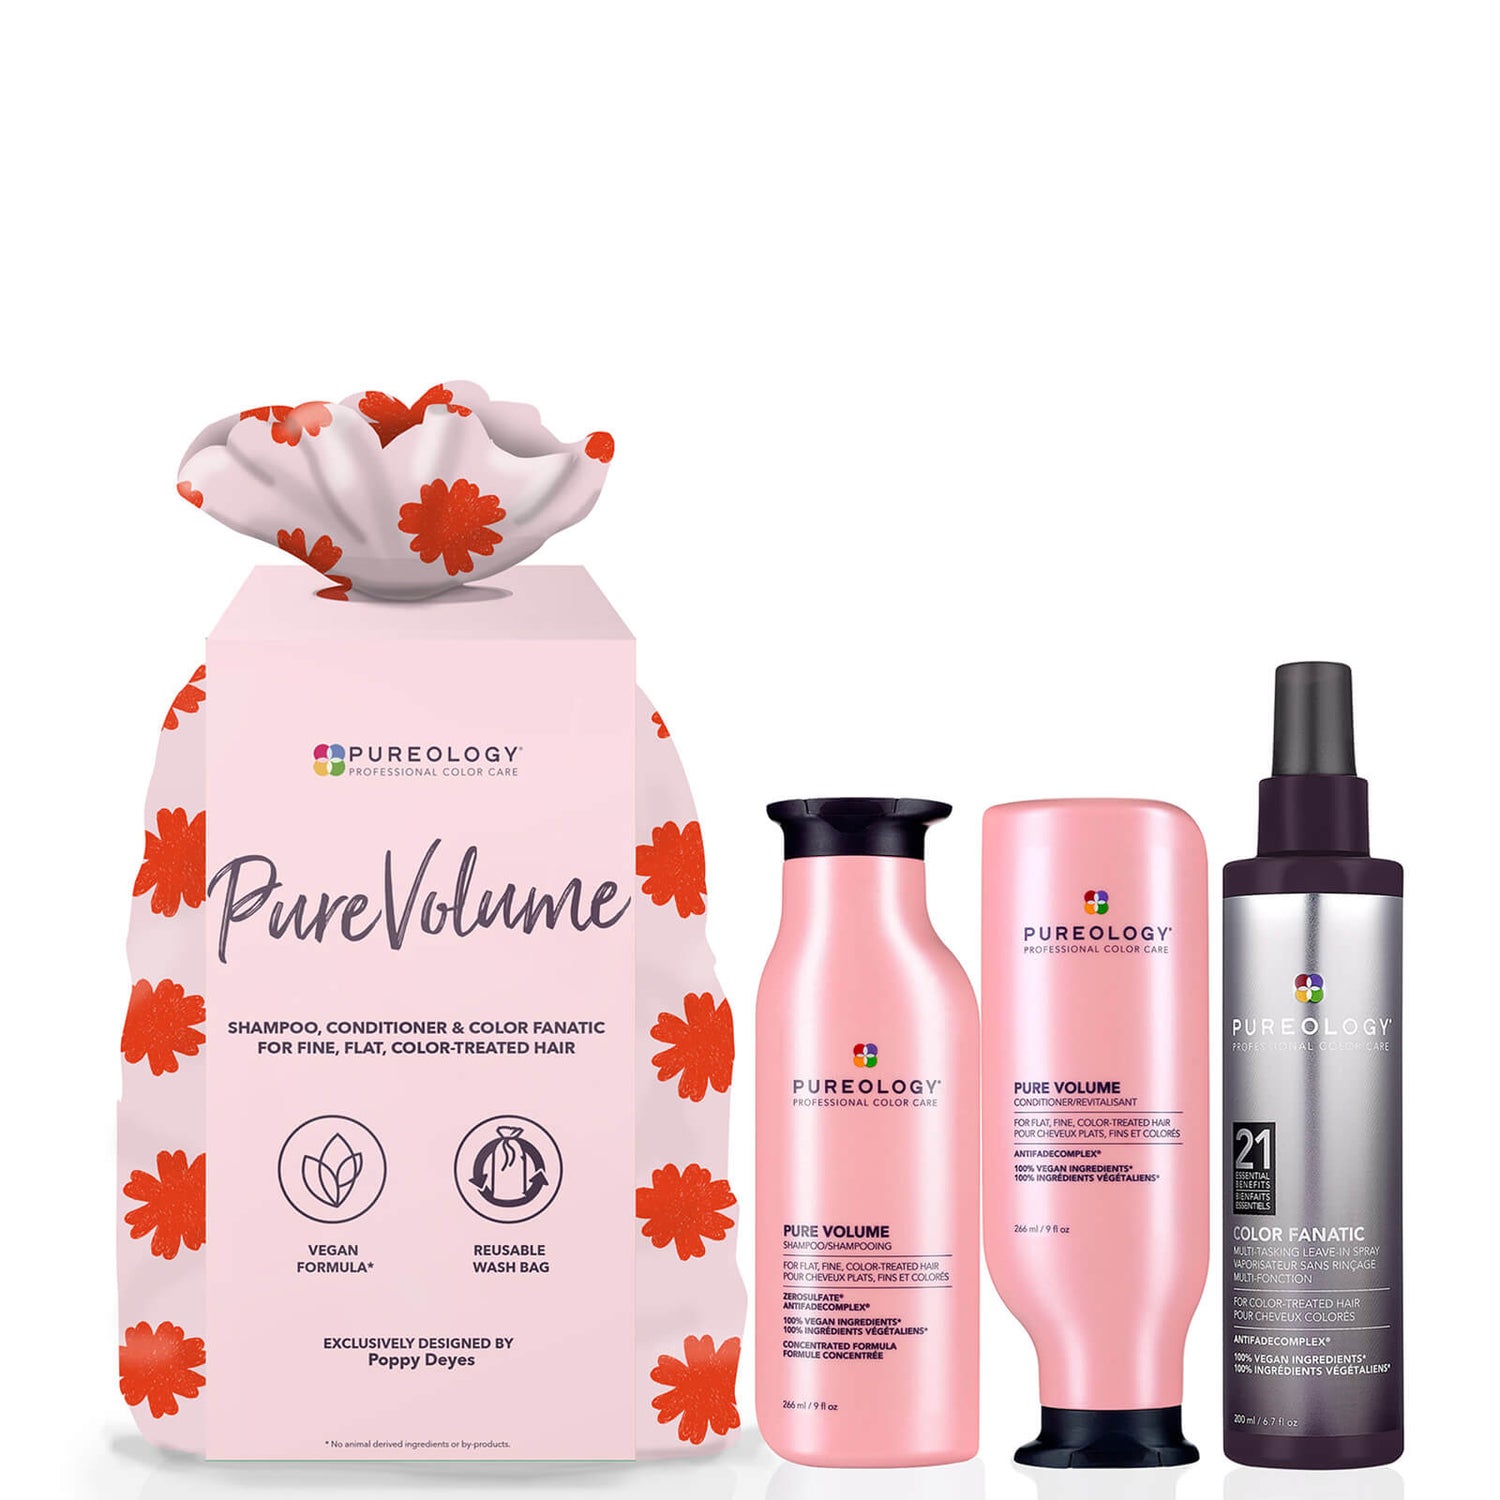 Pureology Pure Volume and Color Fanatic Set (im Wert von 85,50 €)